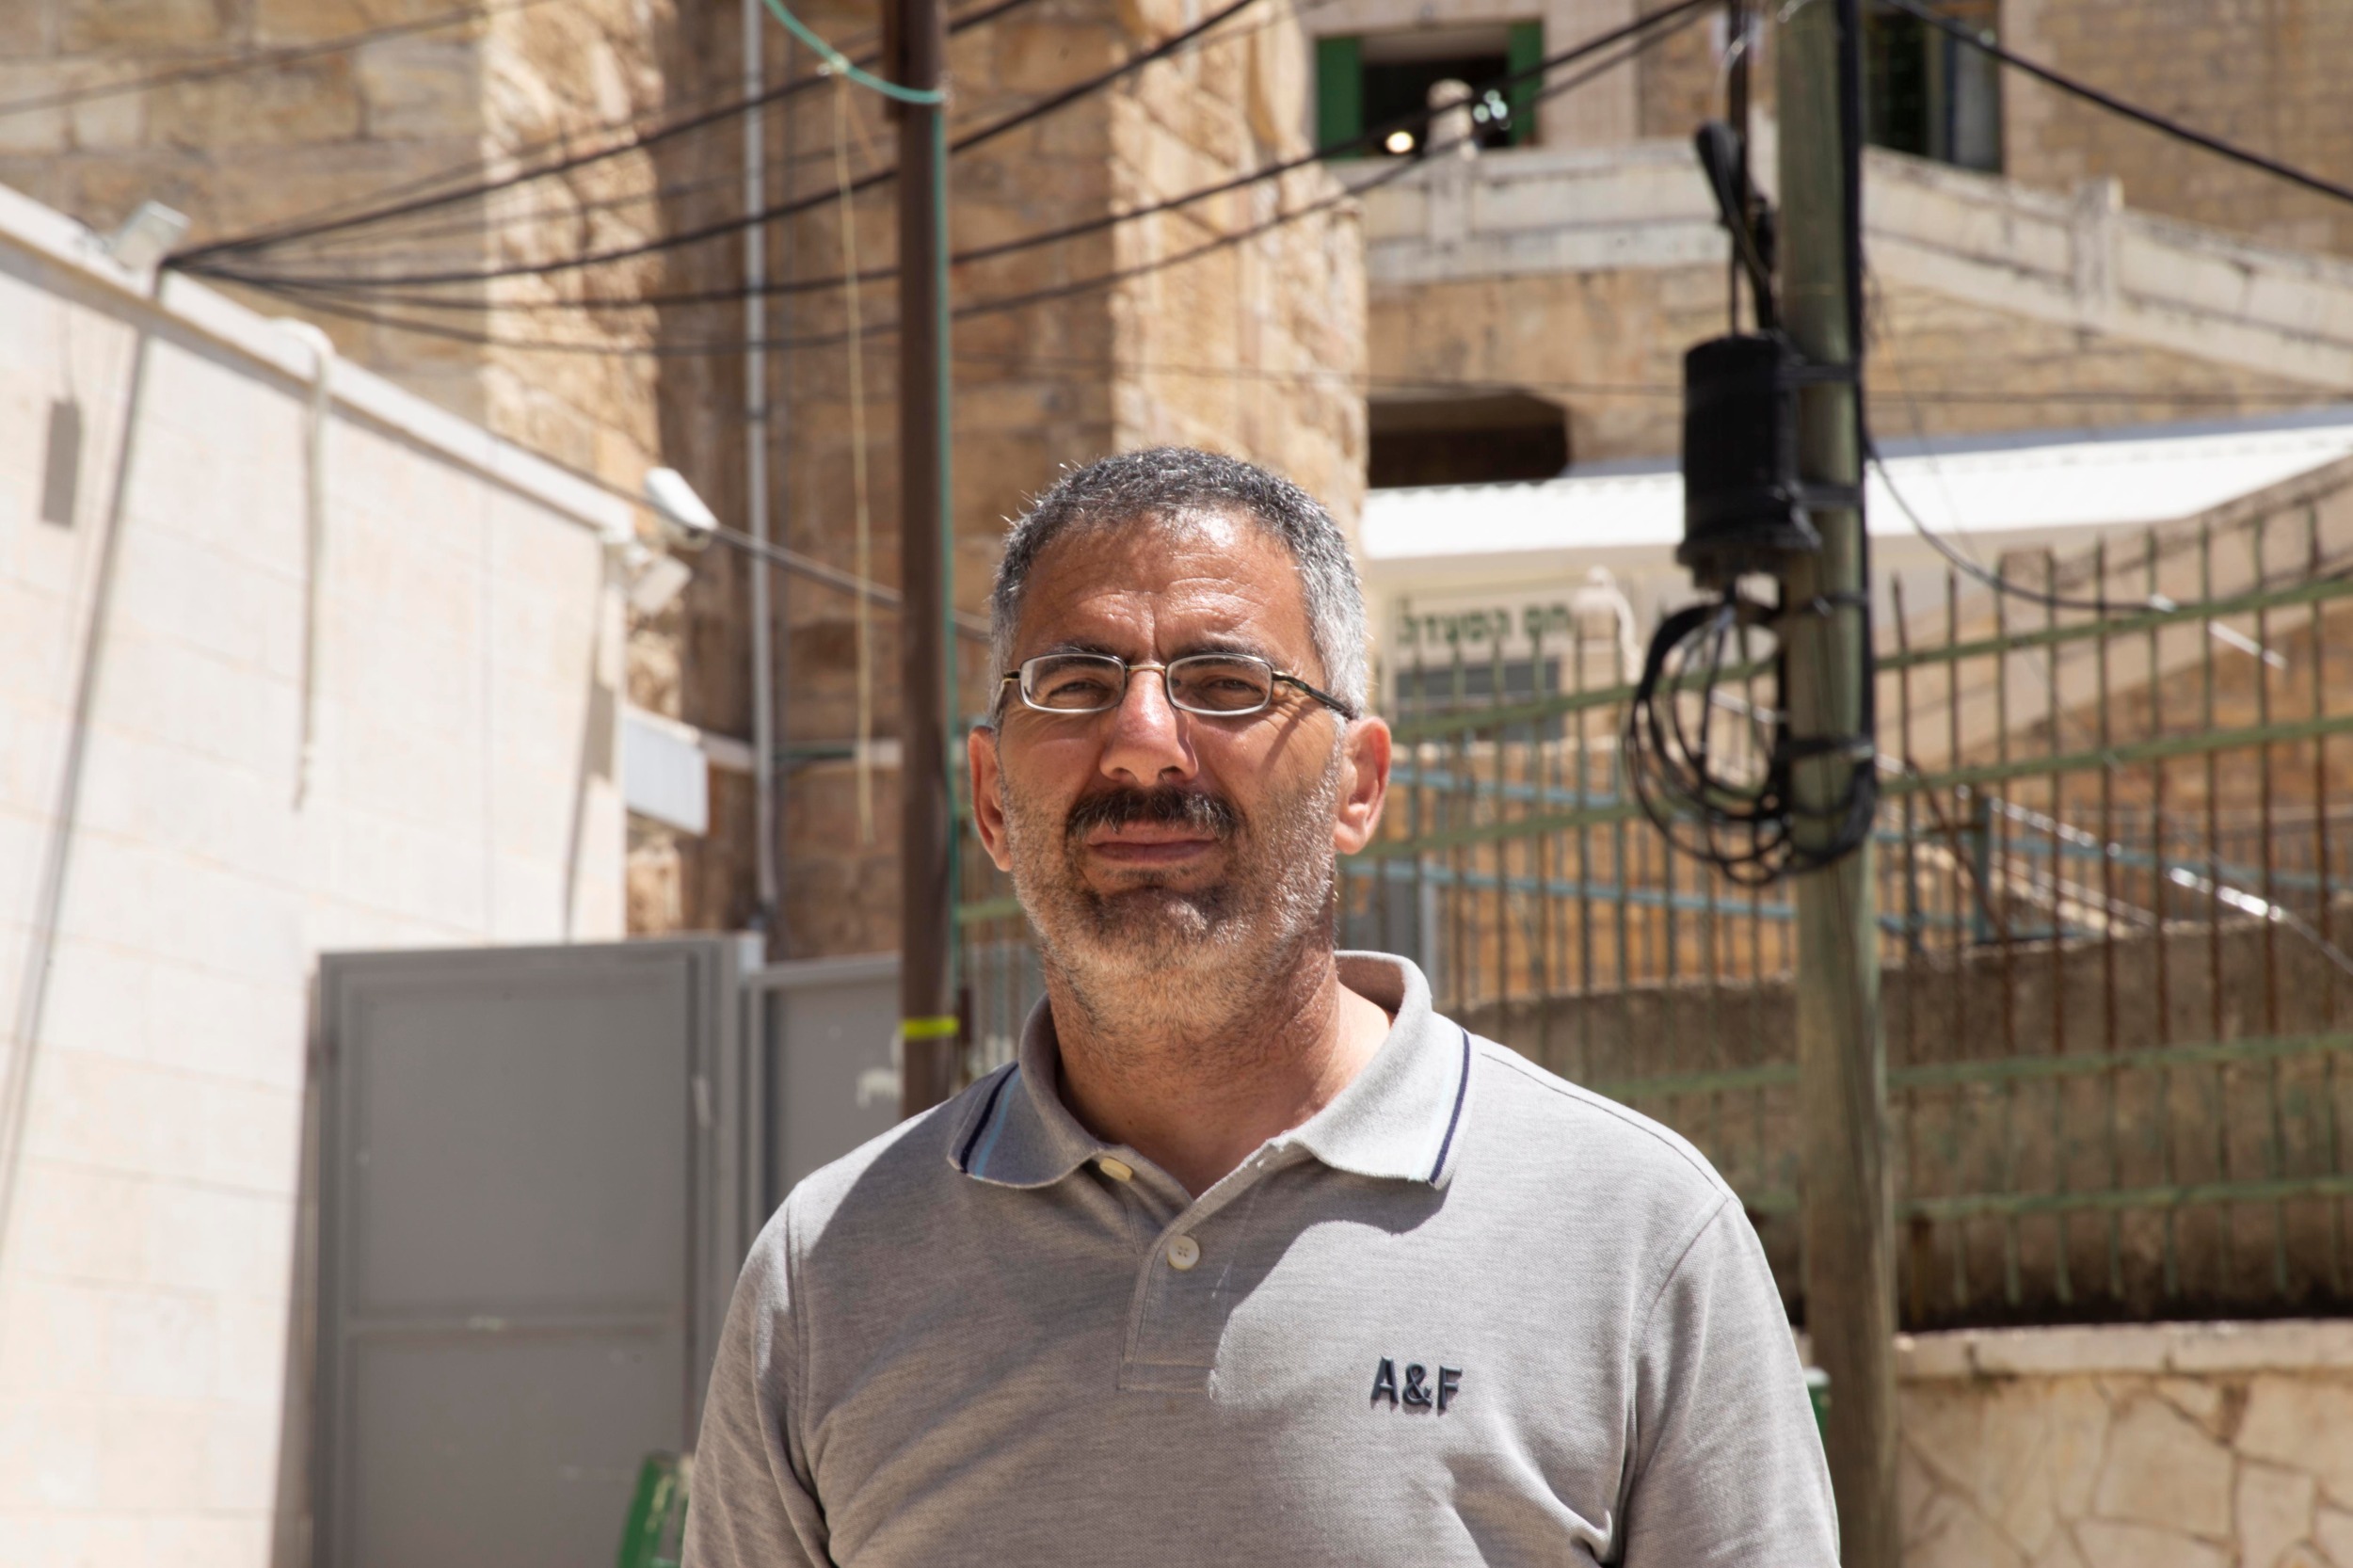 For activist Aref Jaber, the Ibrahimi mosque case is “not about religion, it’s not about Muslims versus Jews. At the end of the day, this boils down to a political issue.” (MEE/Akram al-Waraa)